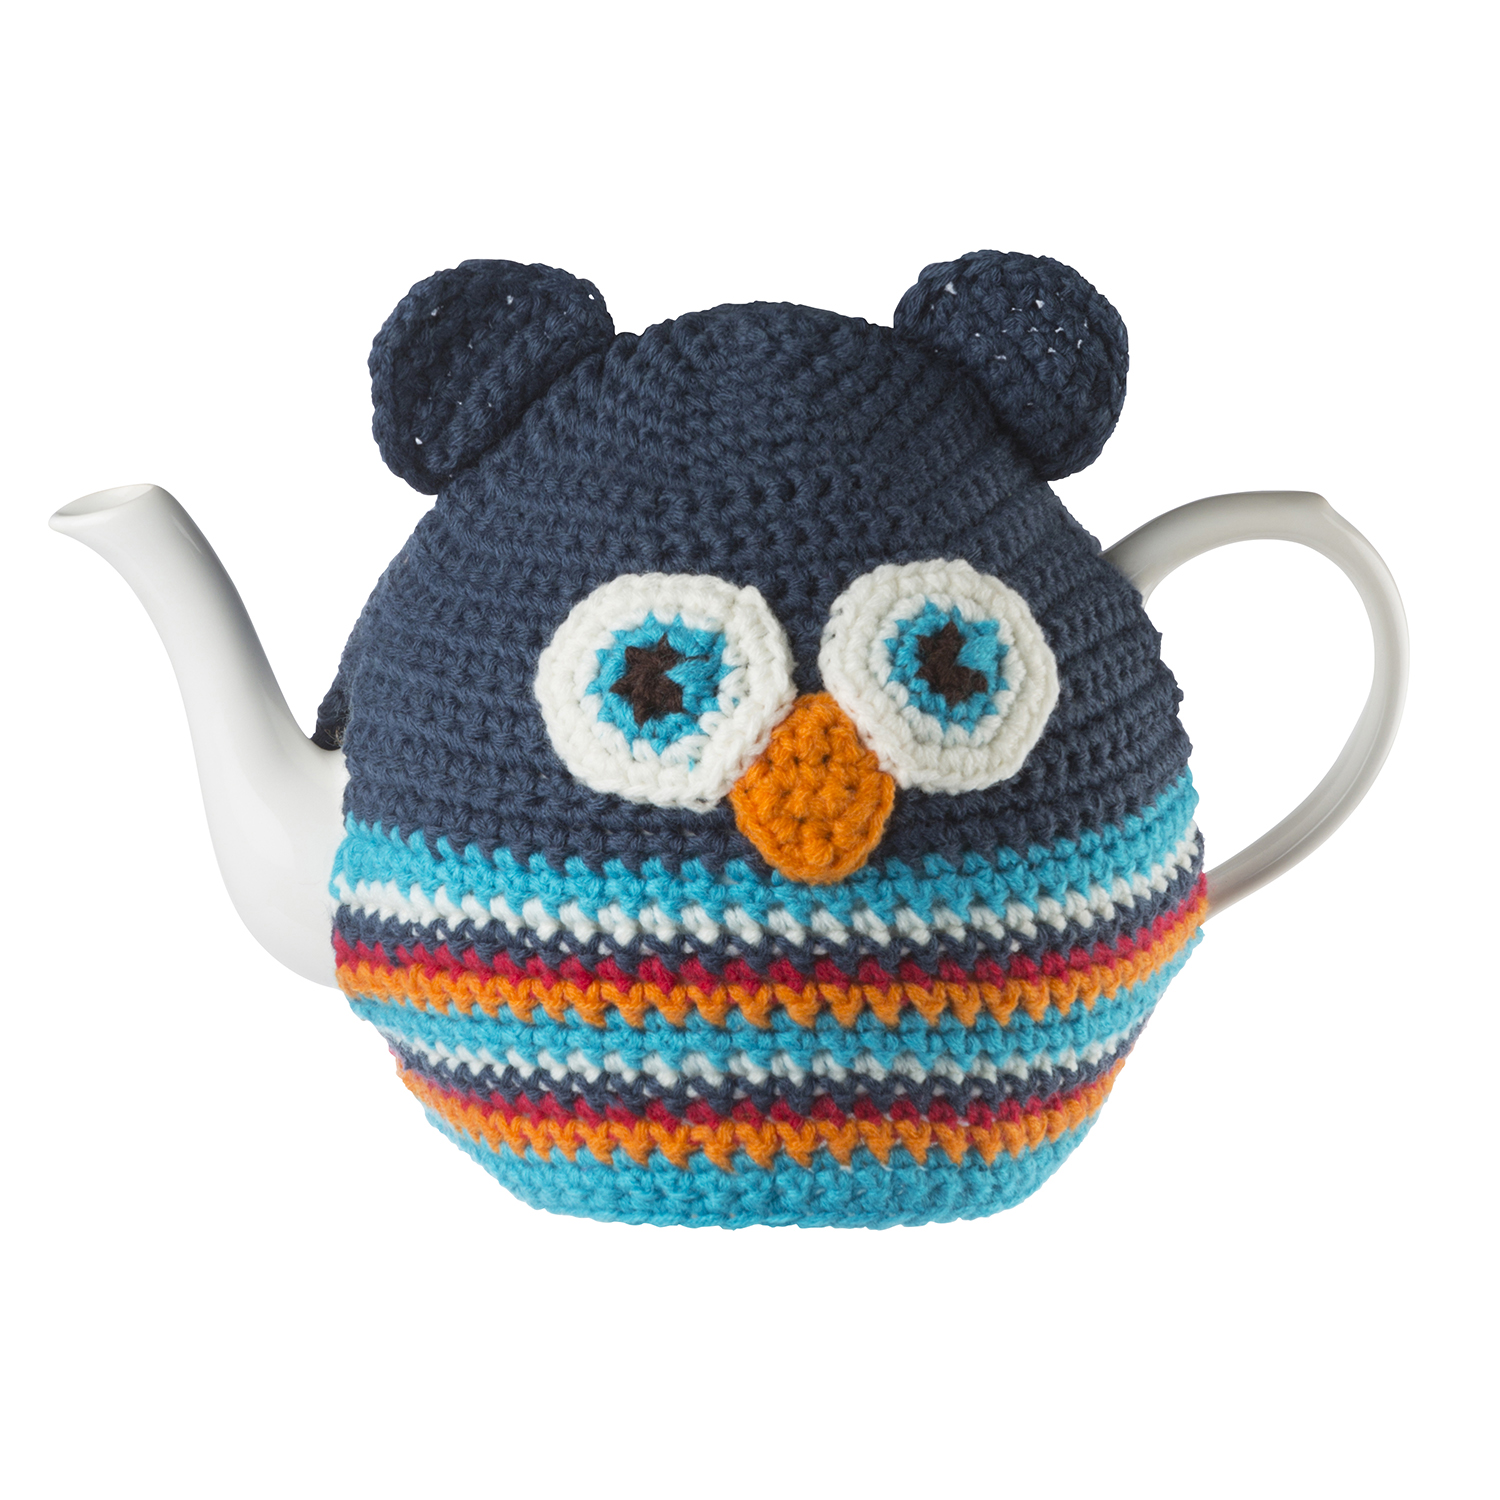 Knitted Tea Cozy - Owl